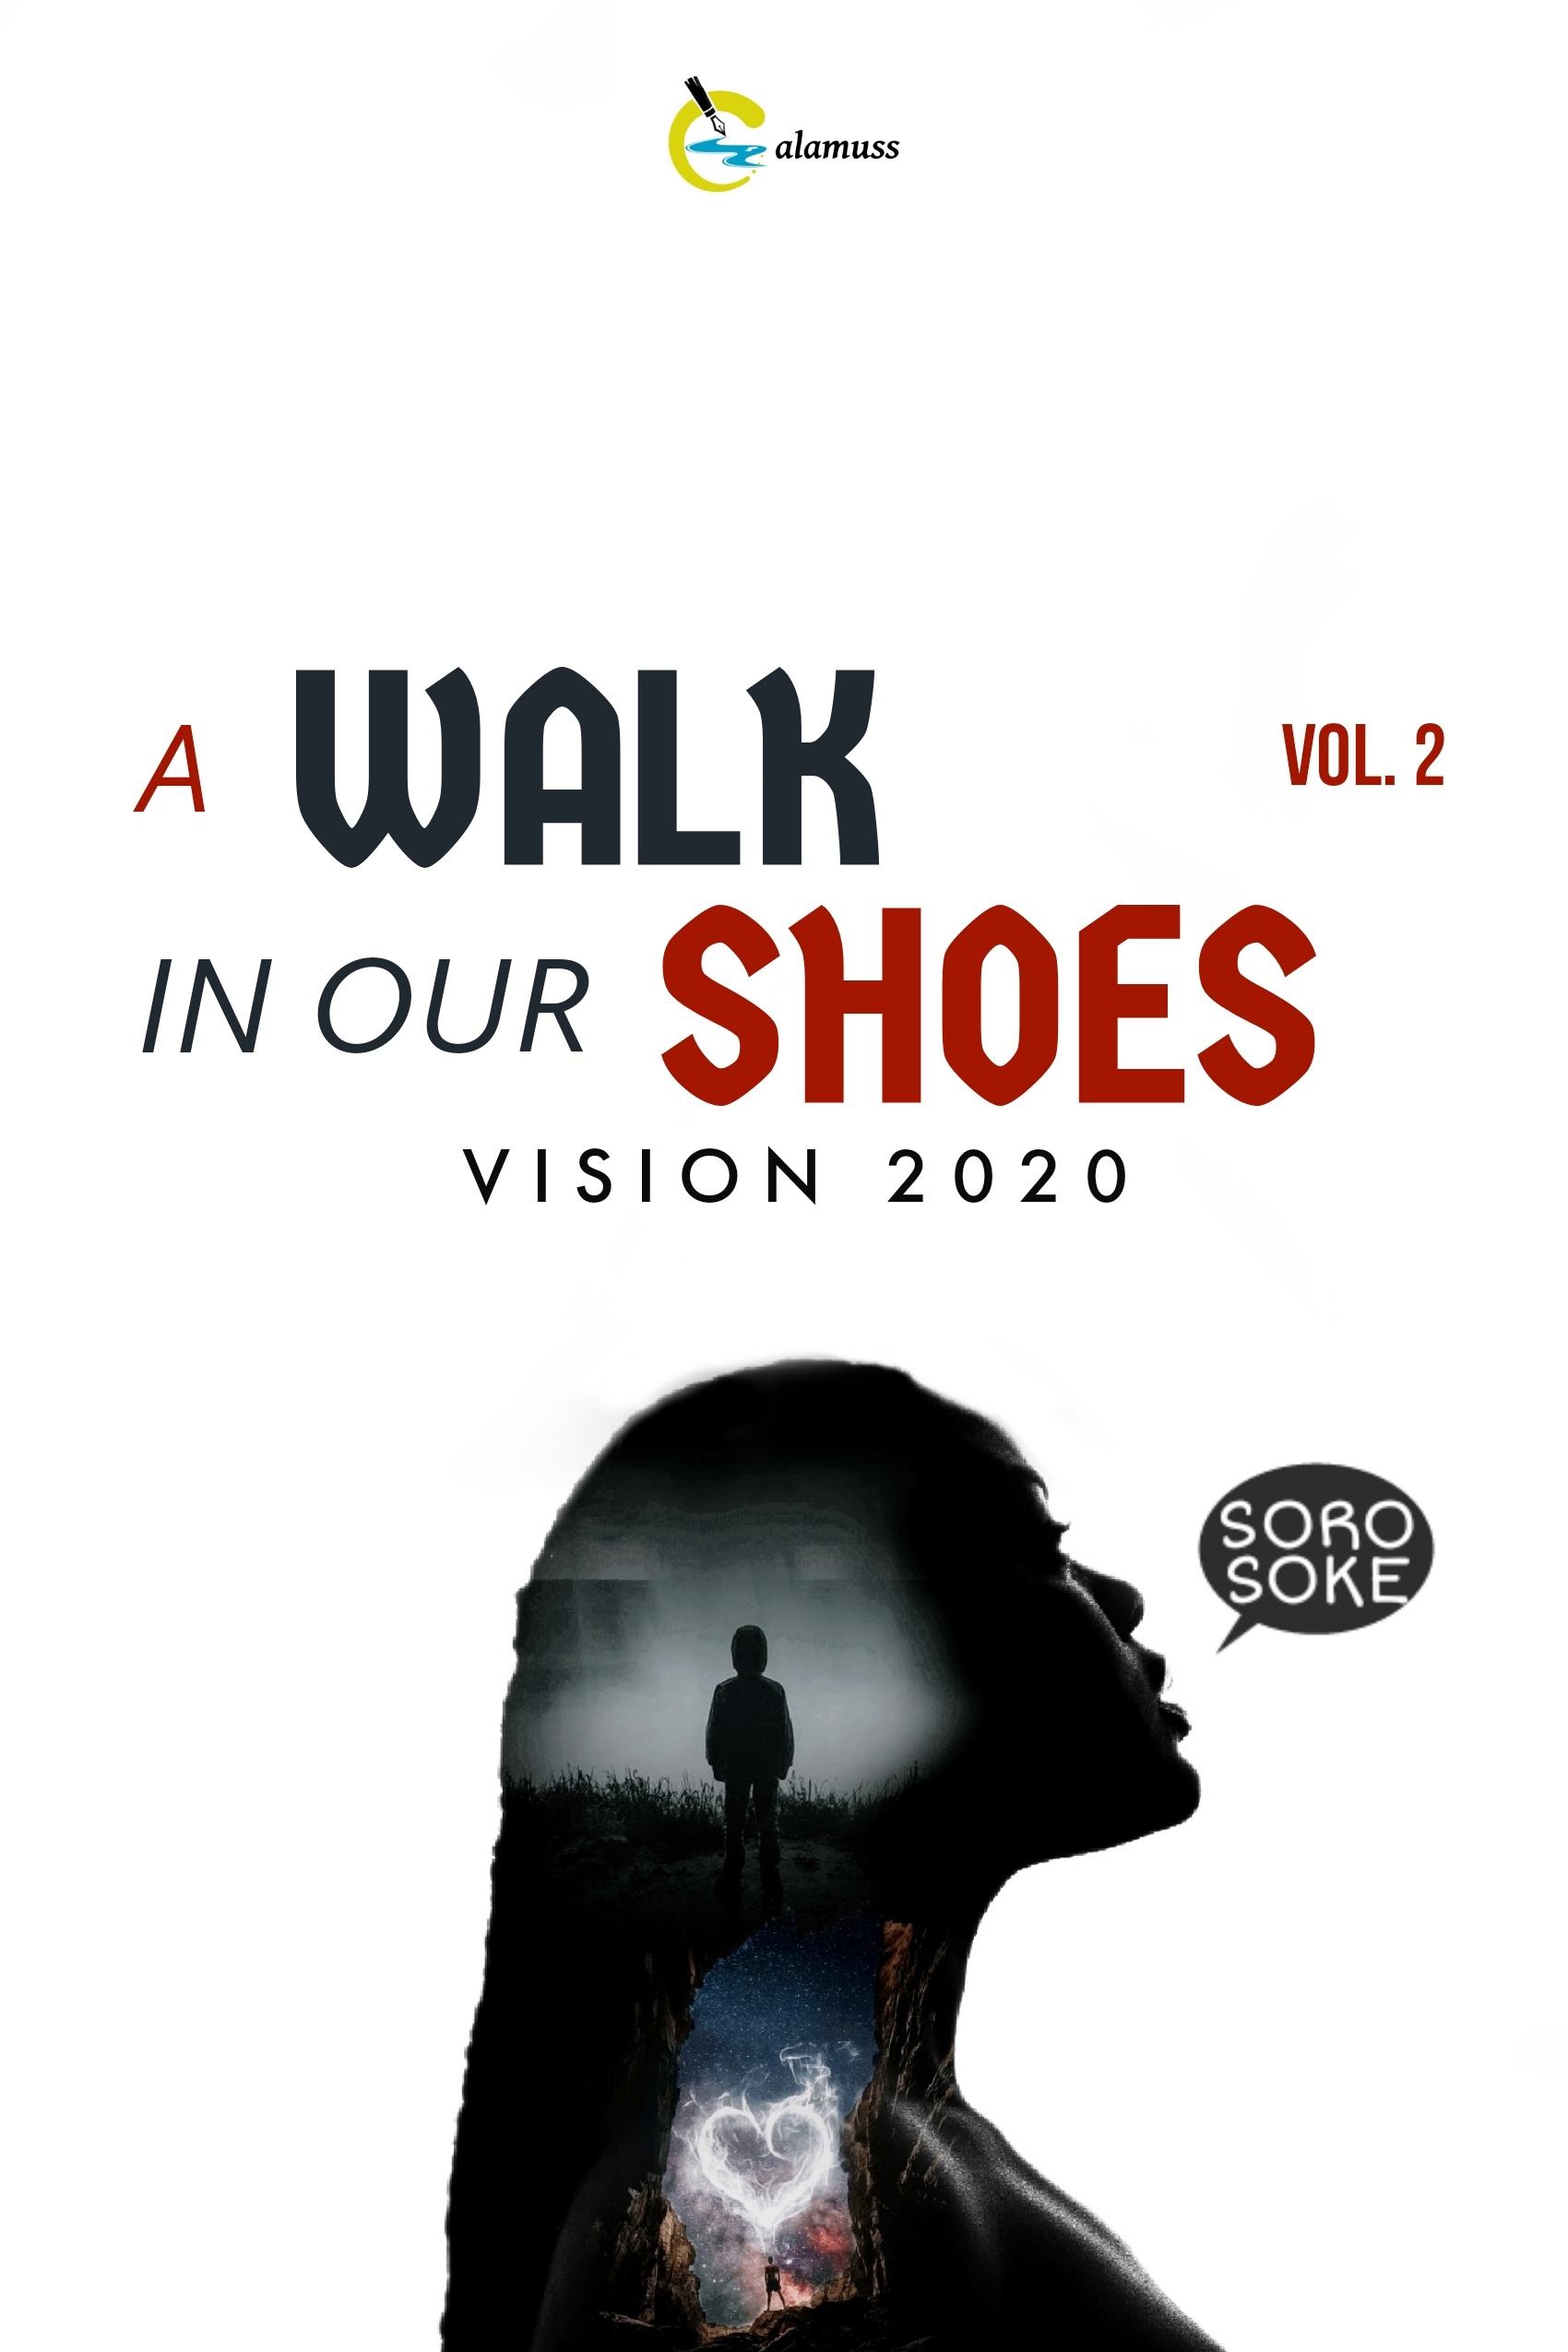 A-WALK-IN-OUR-SHOES-VOL-02